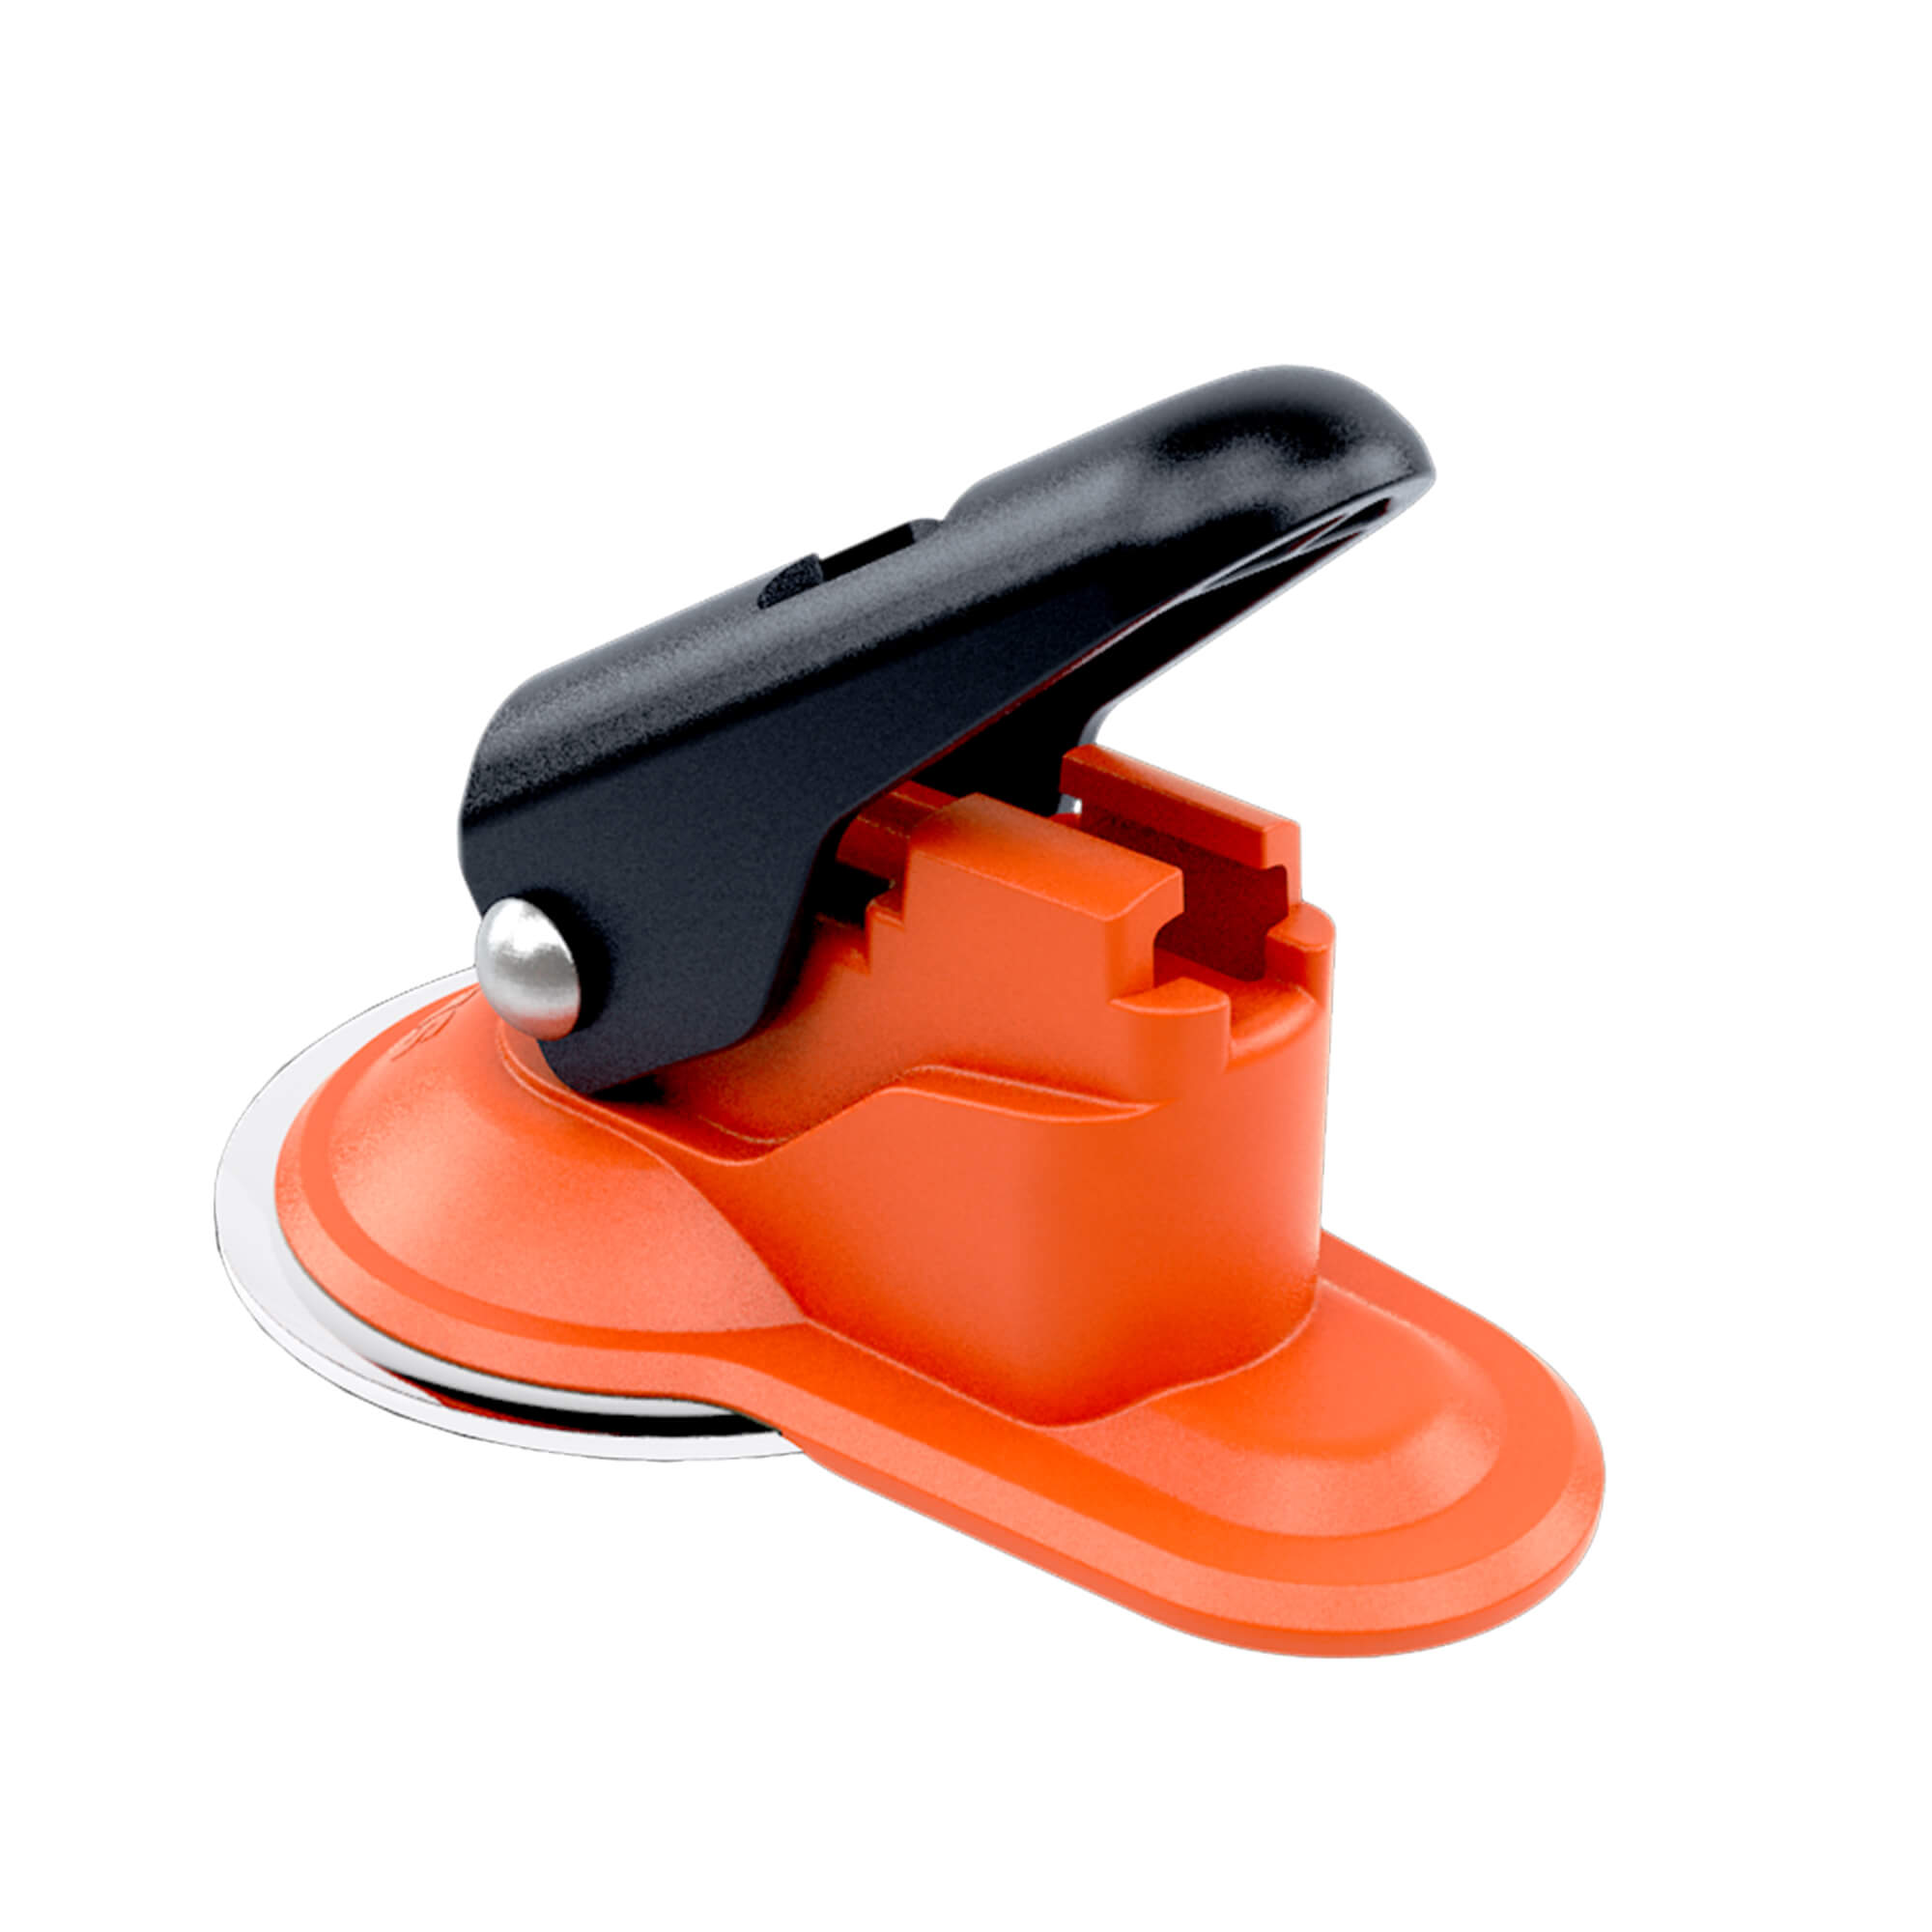 Skipper Suction Pad Holder/Receiver